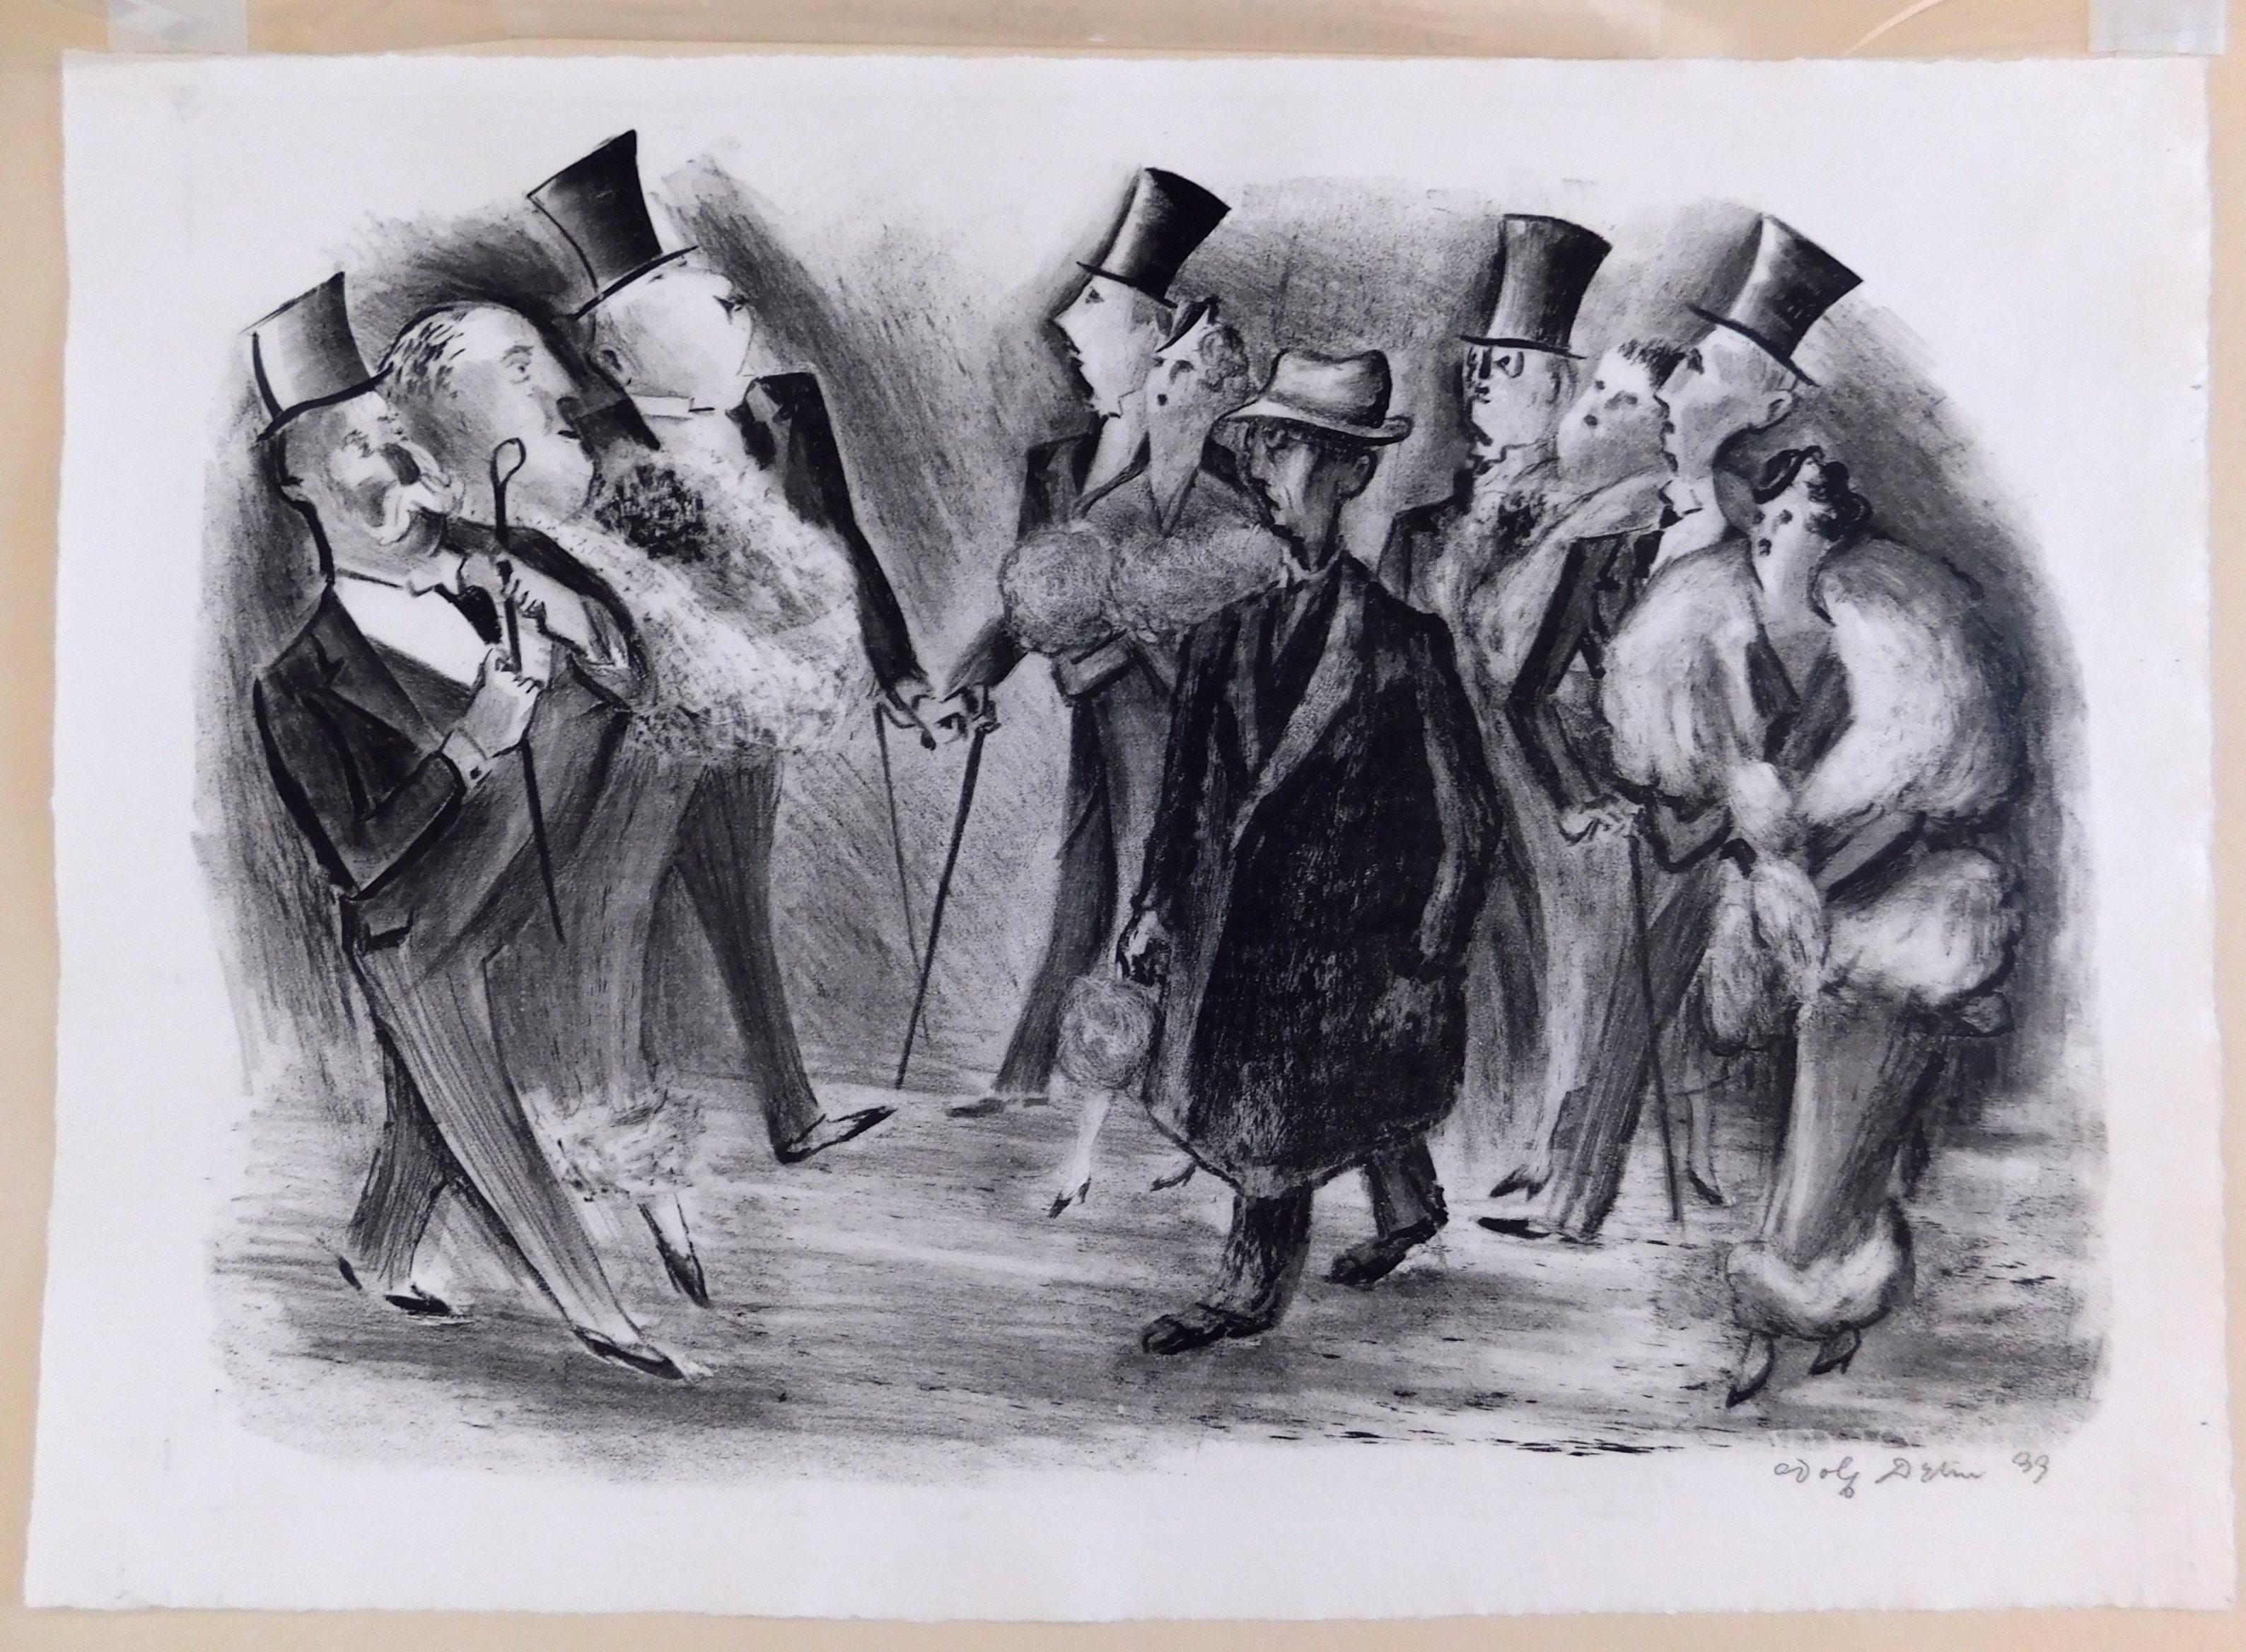 Orignal pencil signed lithograph by Adolf Arthur Dehn (1895-1968).
Titled “Easter Parade” and created 1933.
Lumsdaine/O'Sullivan 270. Edition 300, Contemporary Print Group. 
Image size 9 7/8 x 13 7/8 inches. Sheet size 11 5/16 x 15 3/4